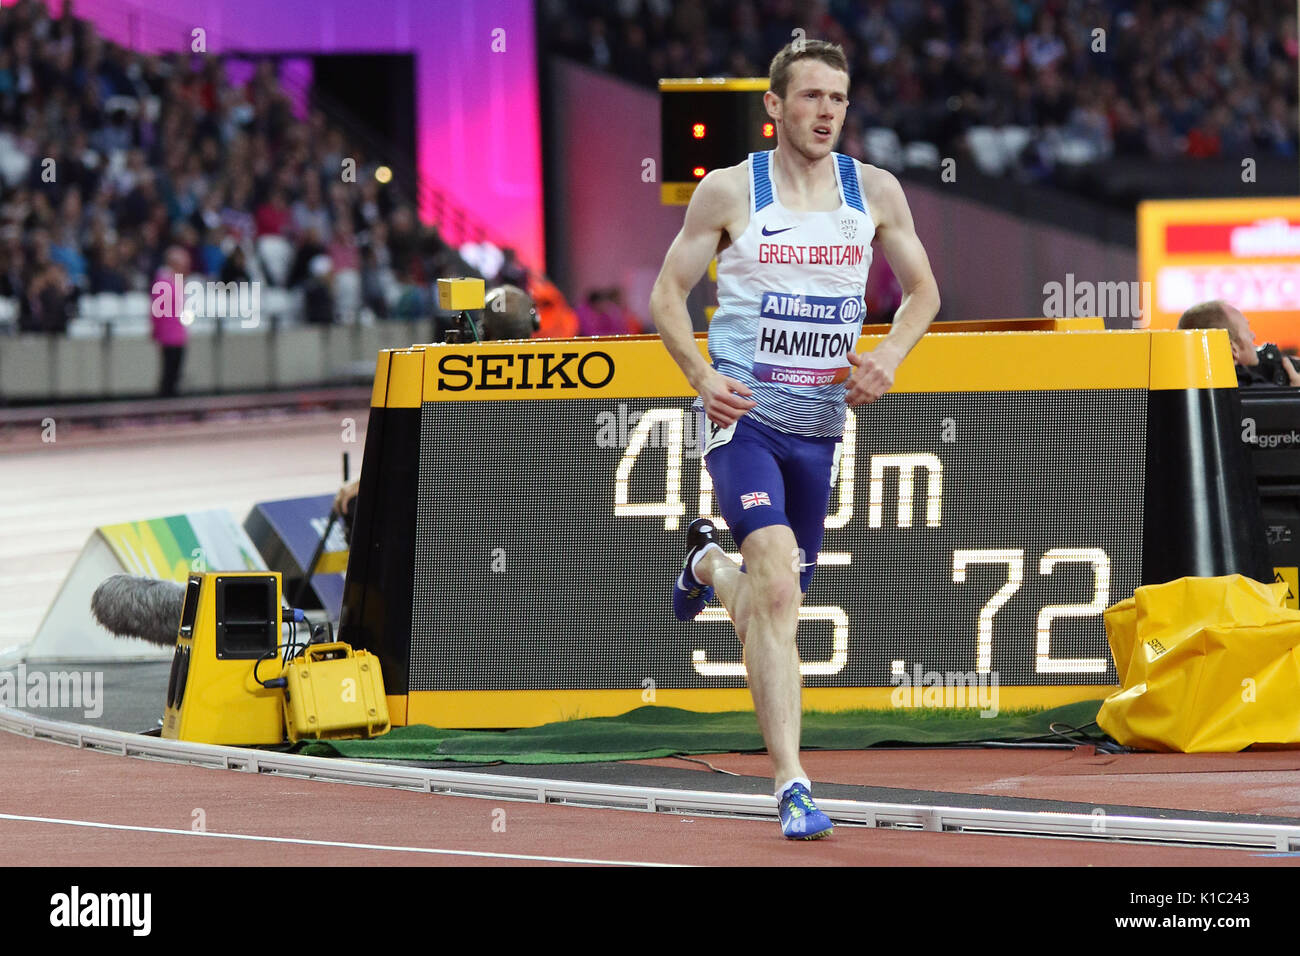 James HAMILTON of Great Britain in the Men's 800 m T20 Final at the World Para Championships in London 2017 Stock Photo